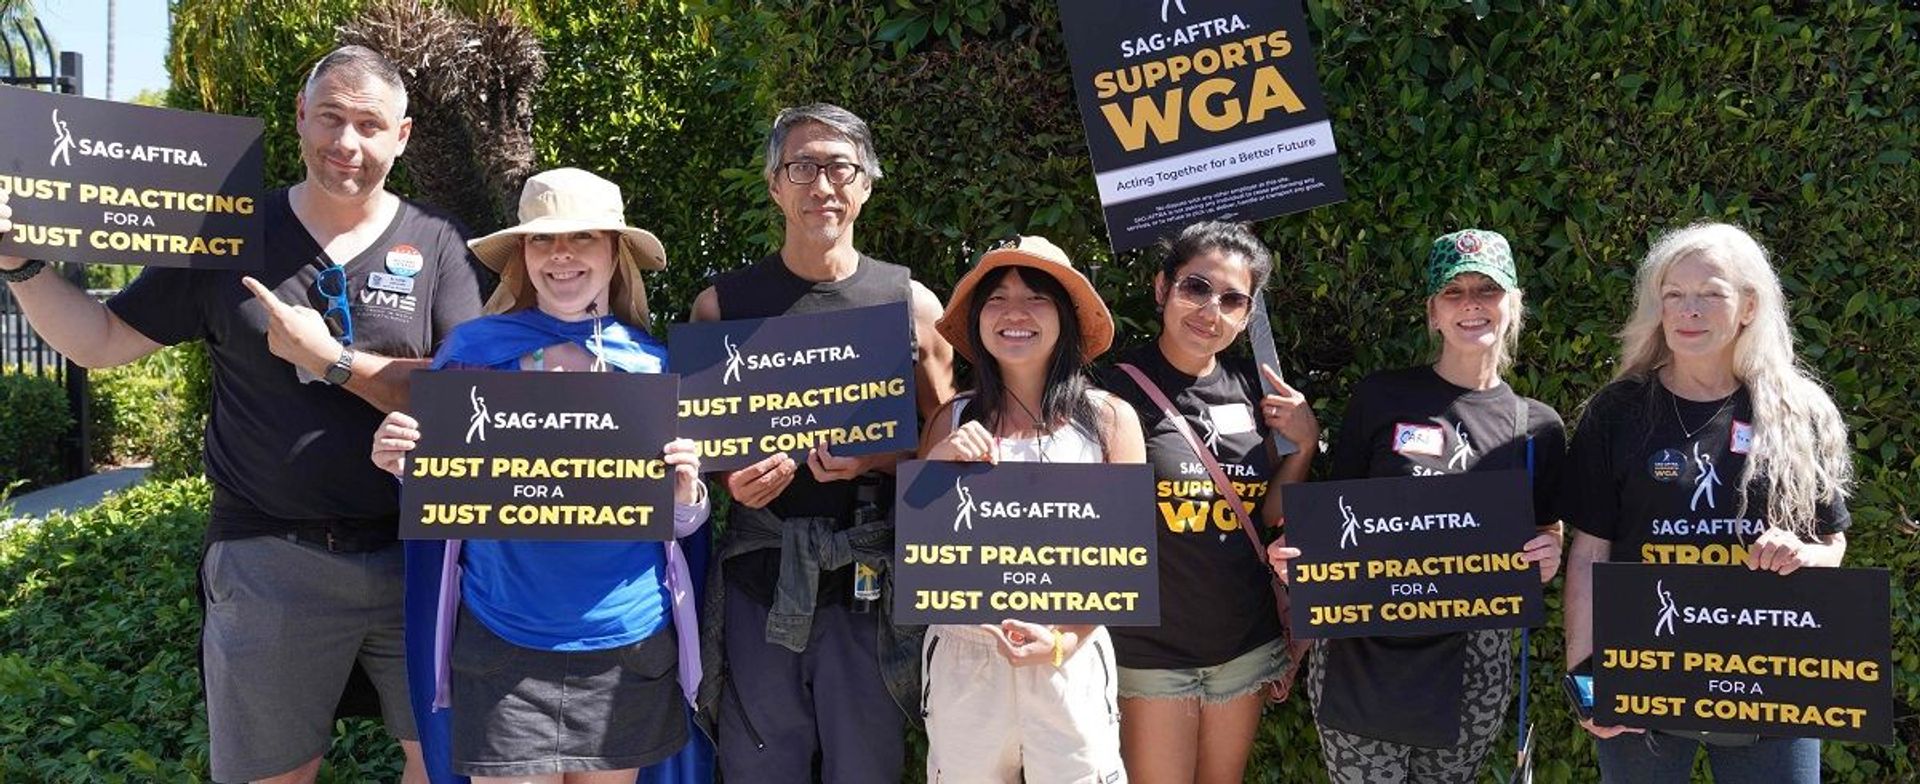 SAGAFTRA Strike What Is The Protest All About?